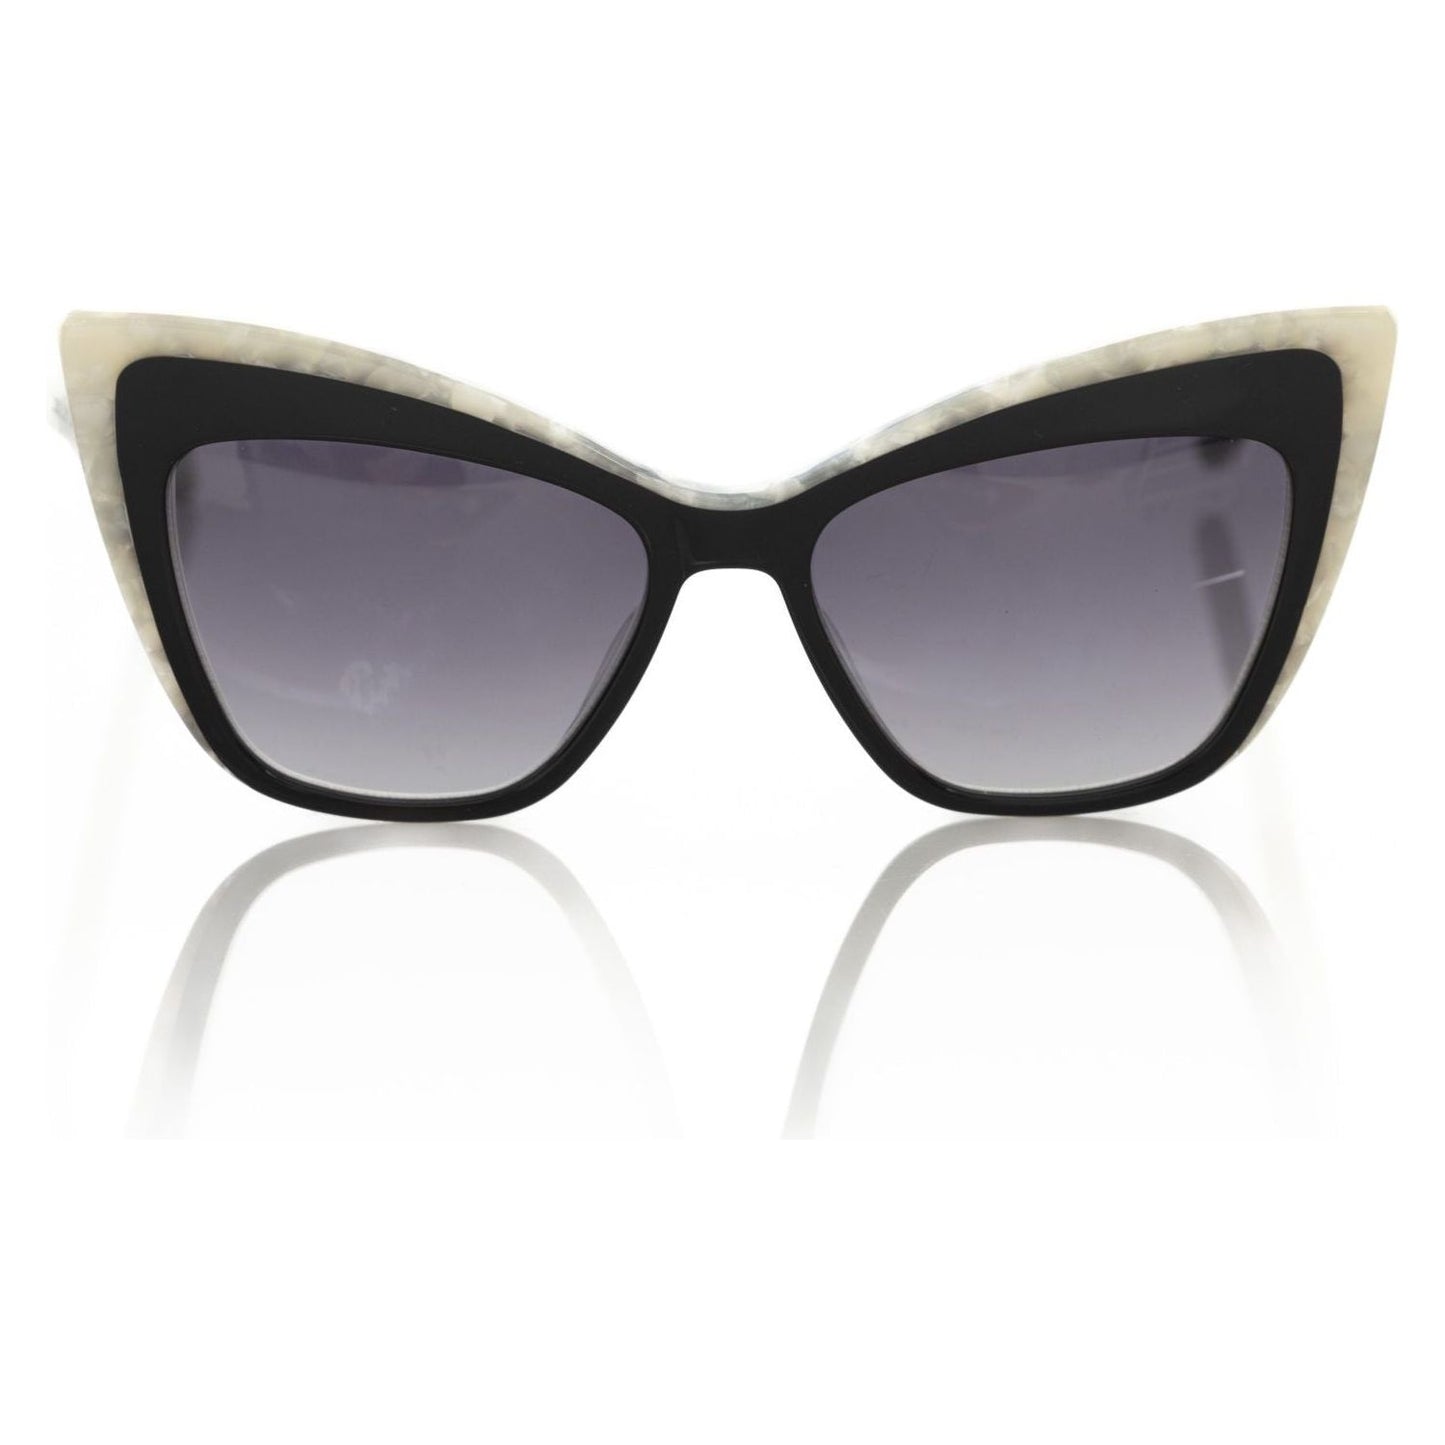 Frankie Morello Chic Cat Eye Sunglasses with Pearly Accents black-acetate-sunglasses-2